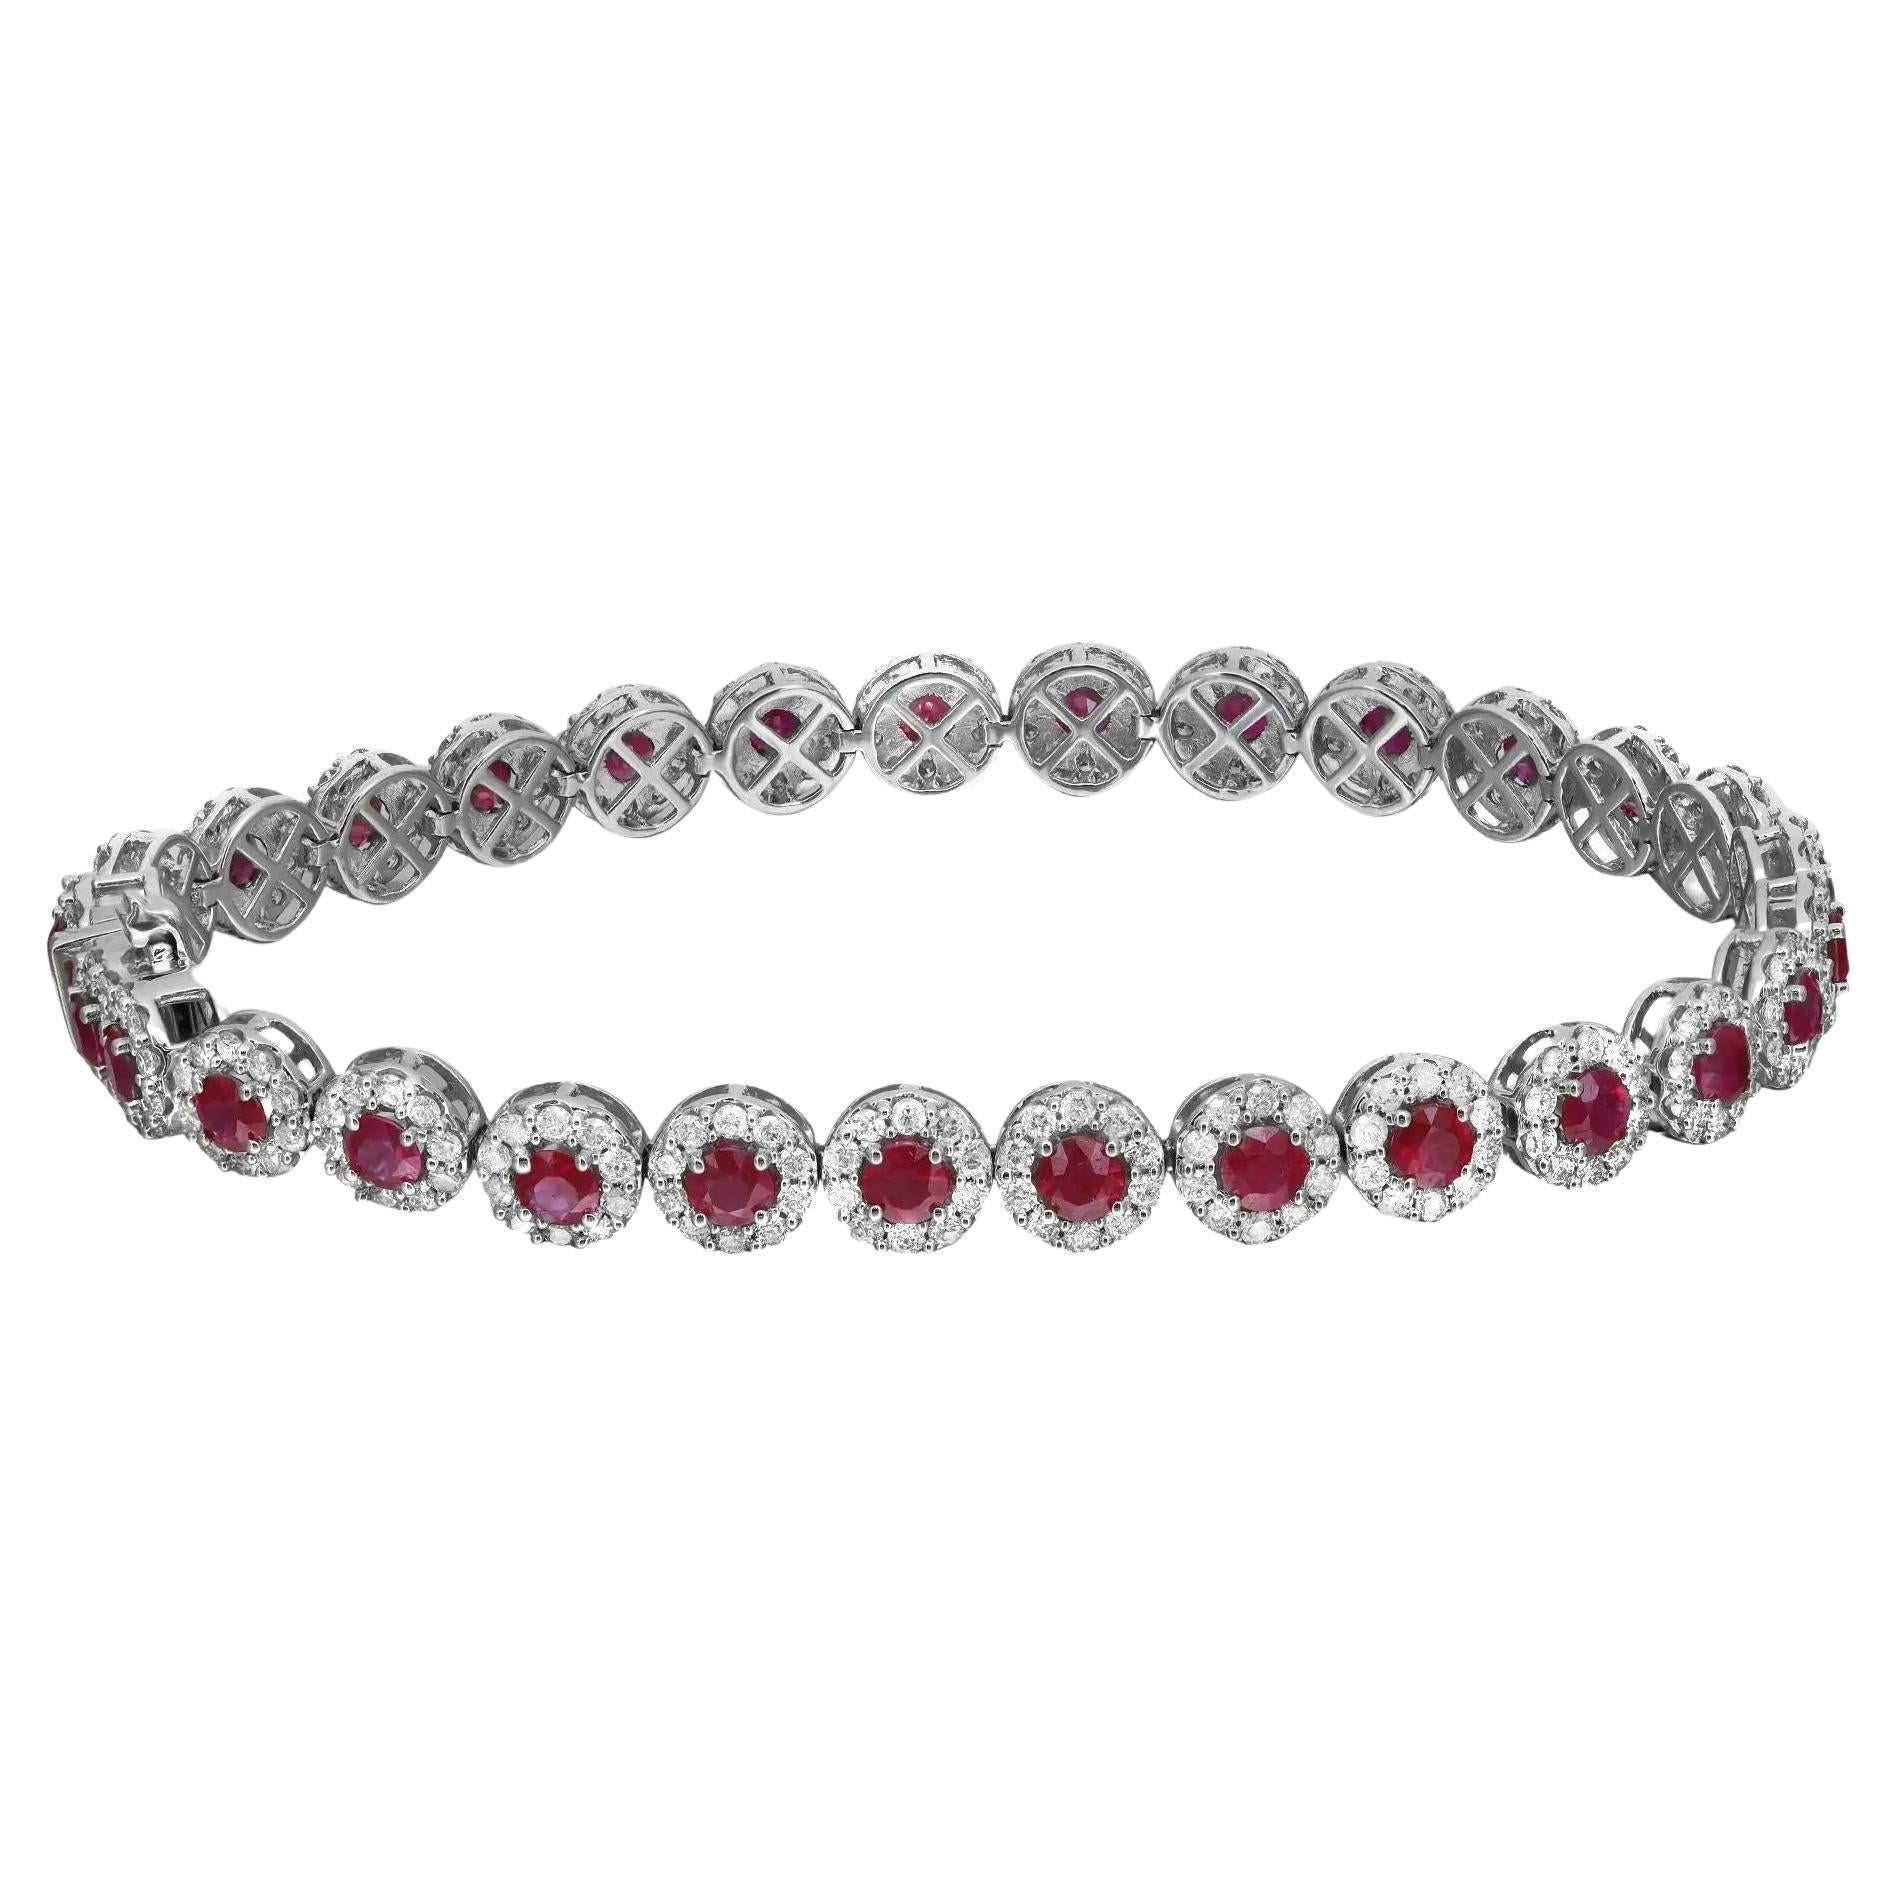 Add a colorful touch of sparkle to your wrist with this gorgeous tennis bracelet from the Rachel Koen collection. Crafted in lustrous 14K white gold. It features 29 prong set round cut rubies highlighted with round brilliant cut diamond halo. Total